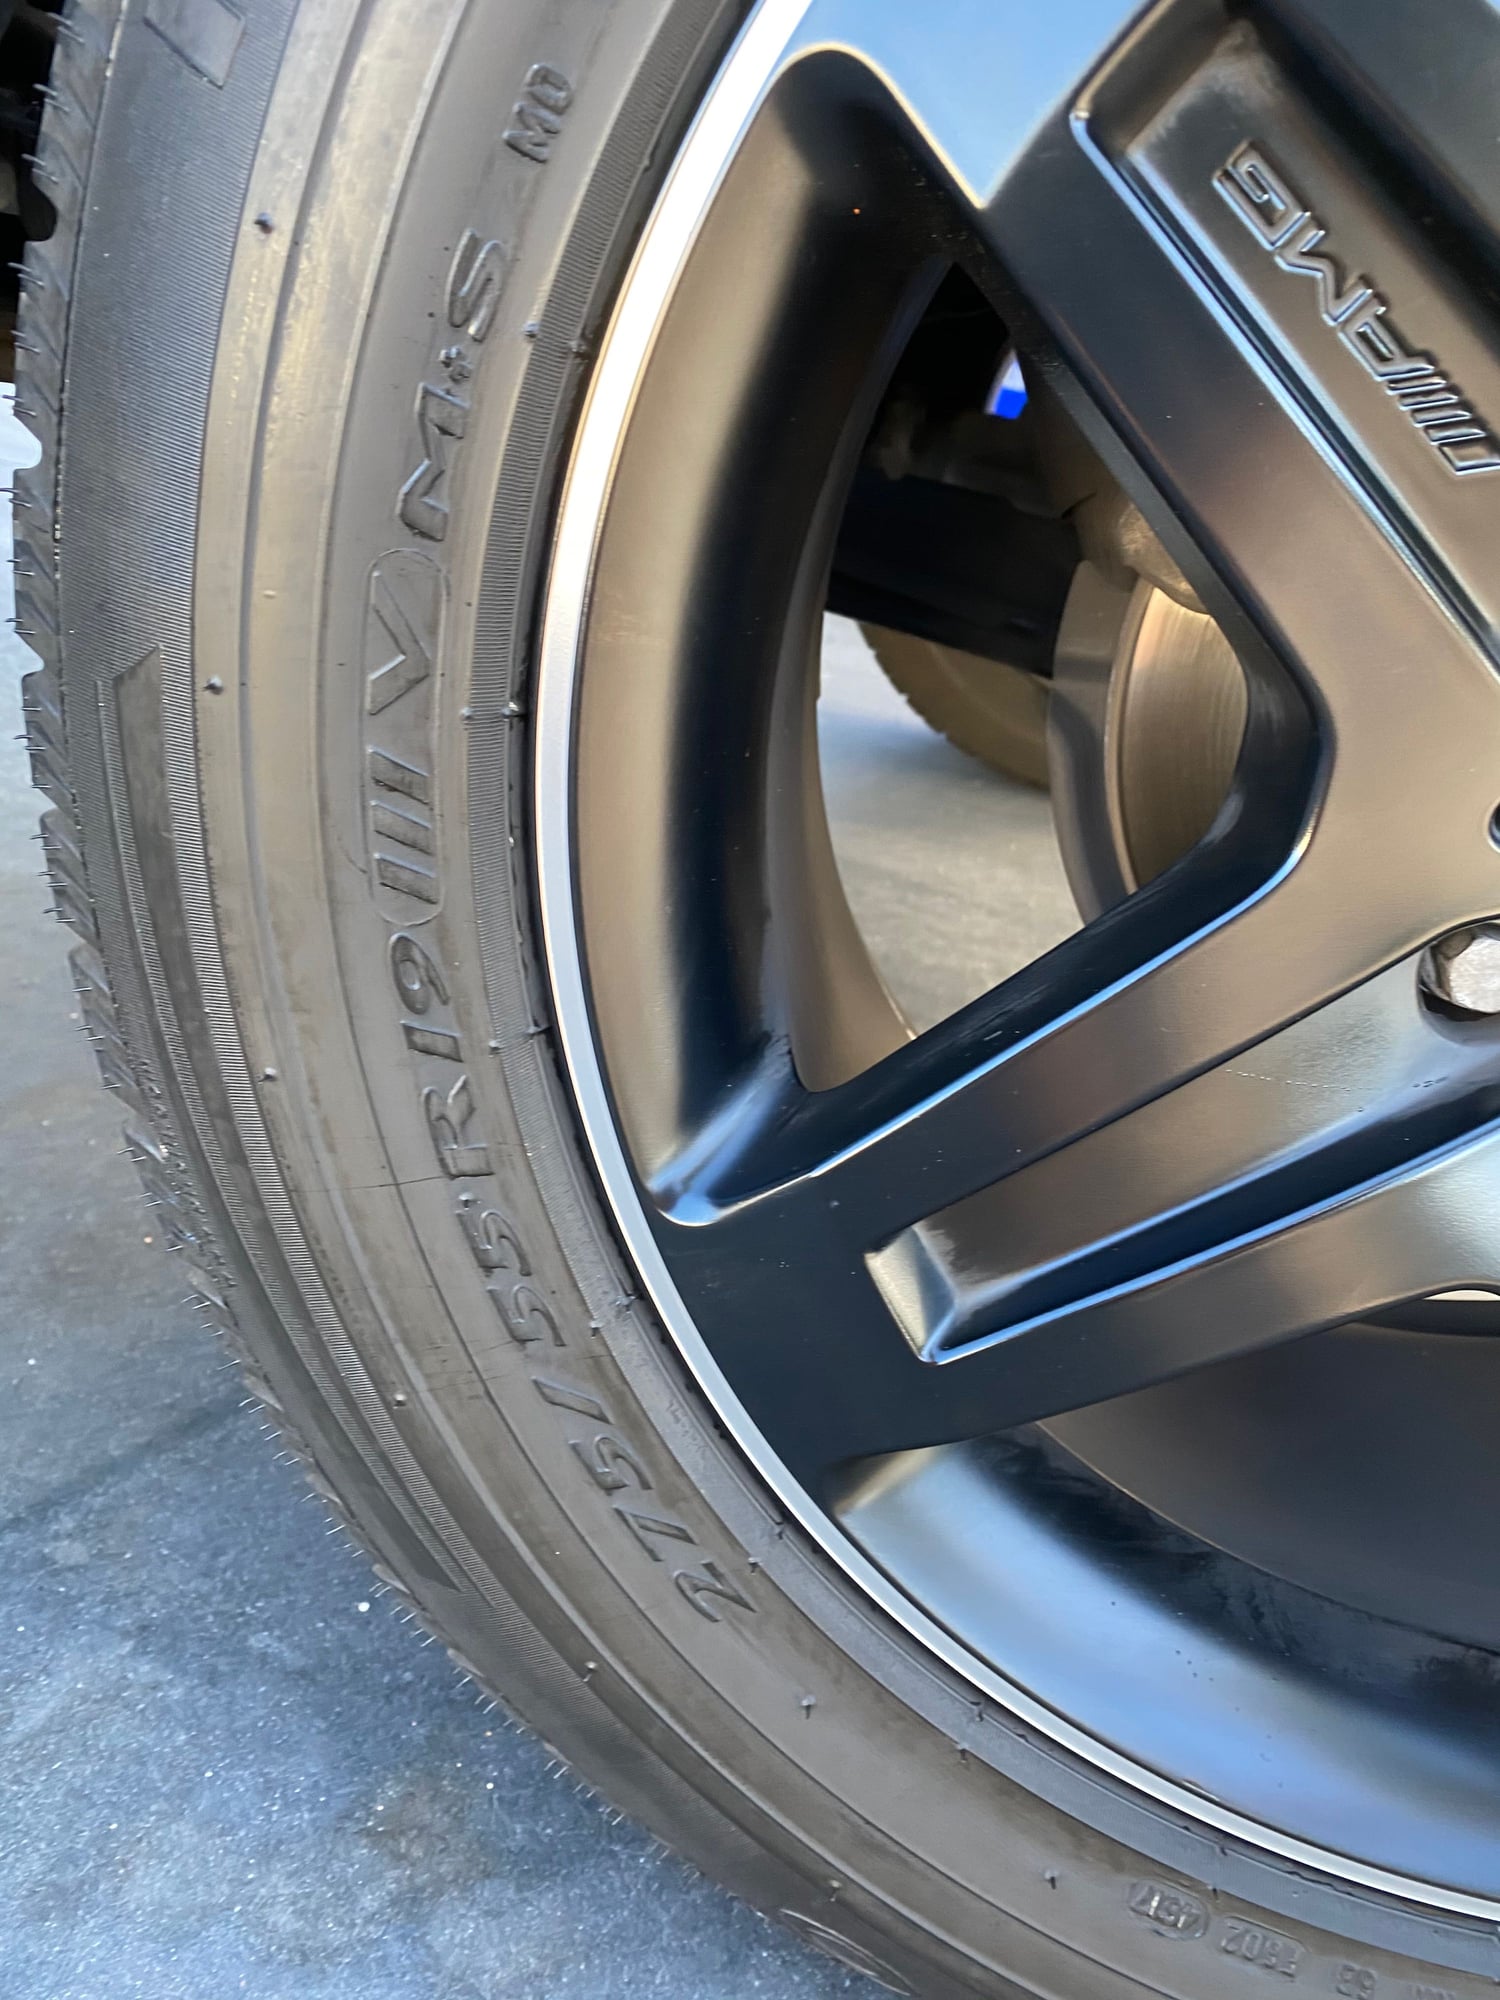 Wheels and Tires/Axles - 2018 G550 factory wheels - Used - 2018 Mercedes-Benz G550 - Carlsbad, NM 88220, United States